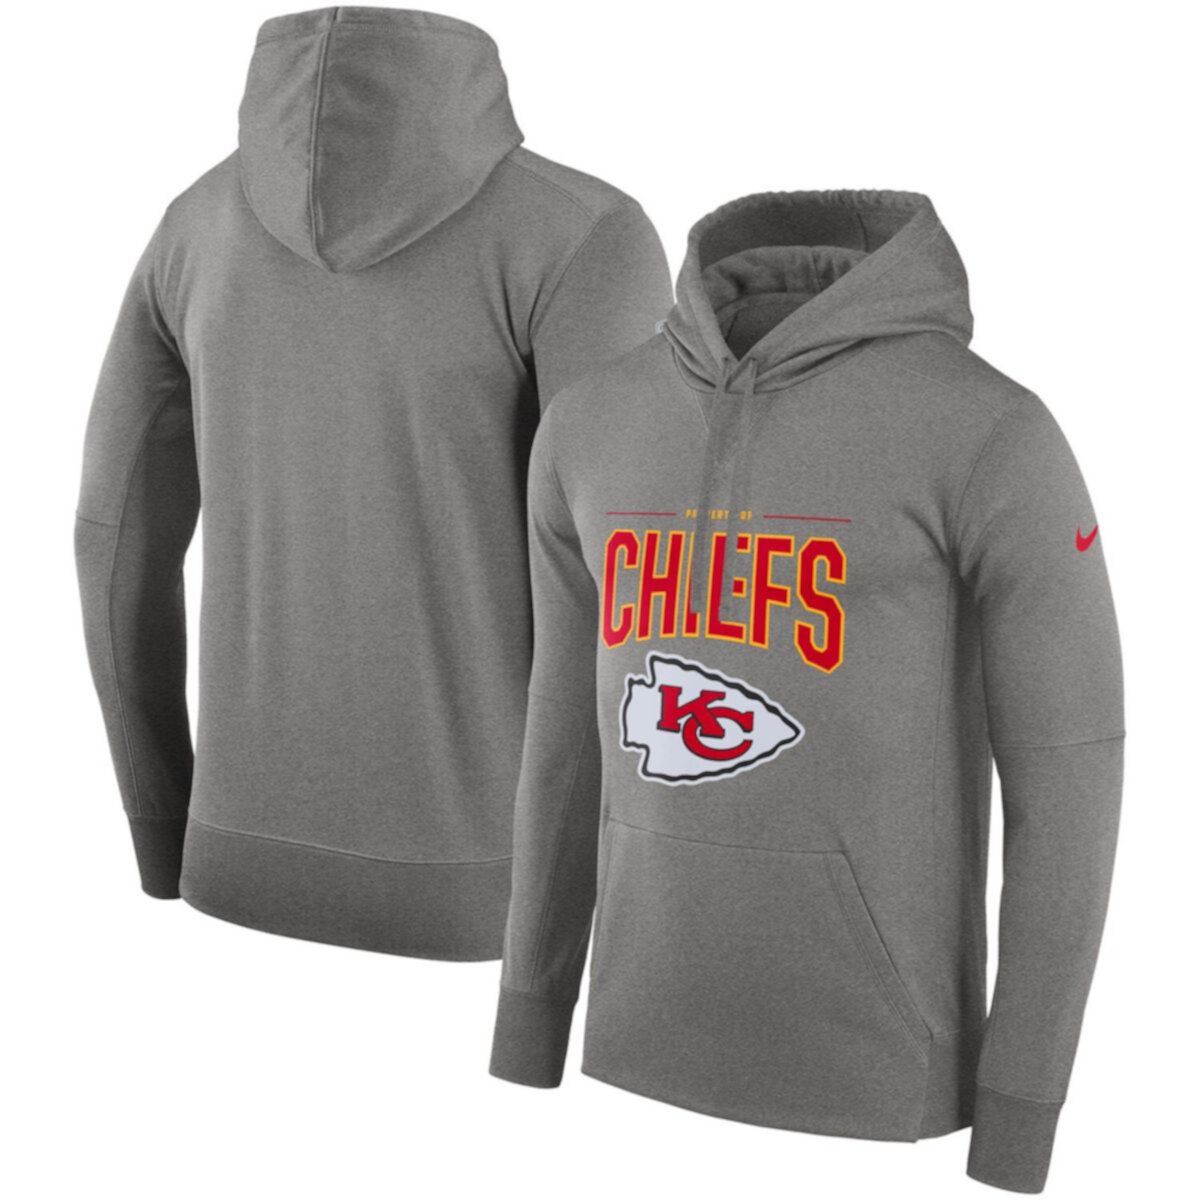 Men's Nike Gray Kansas City Chiefs Sideline Property of Performance Pullover Hoodie Nike